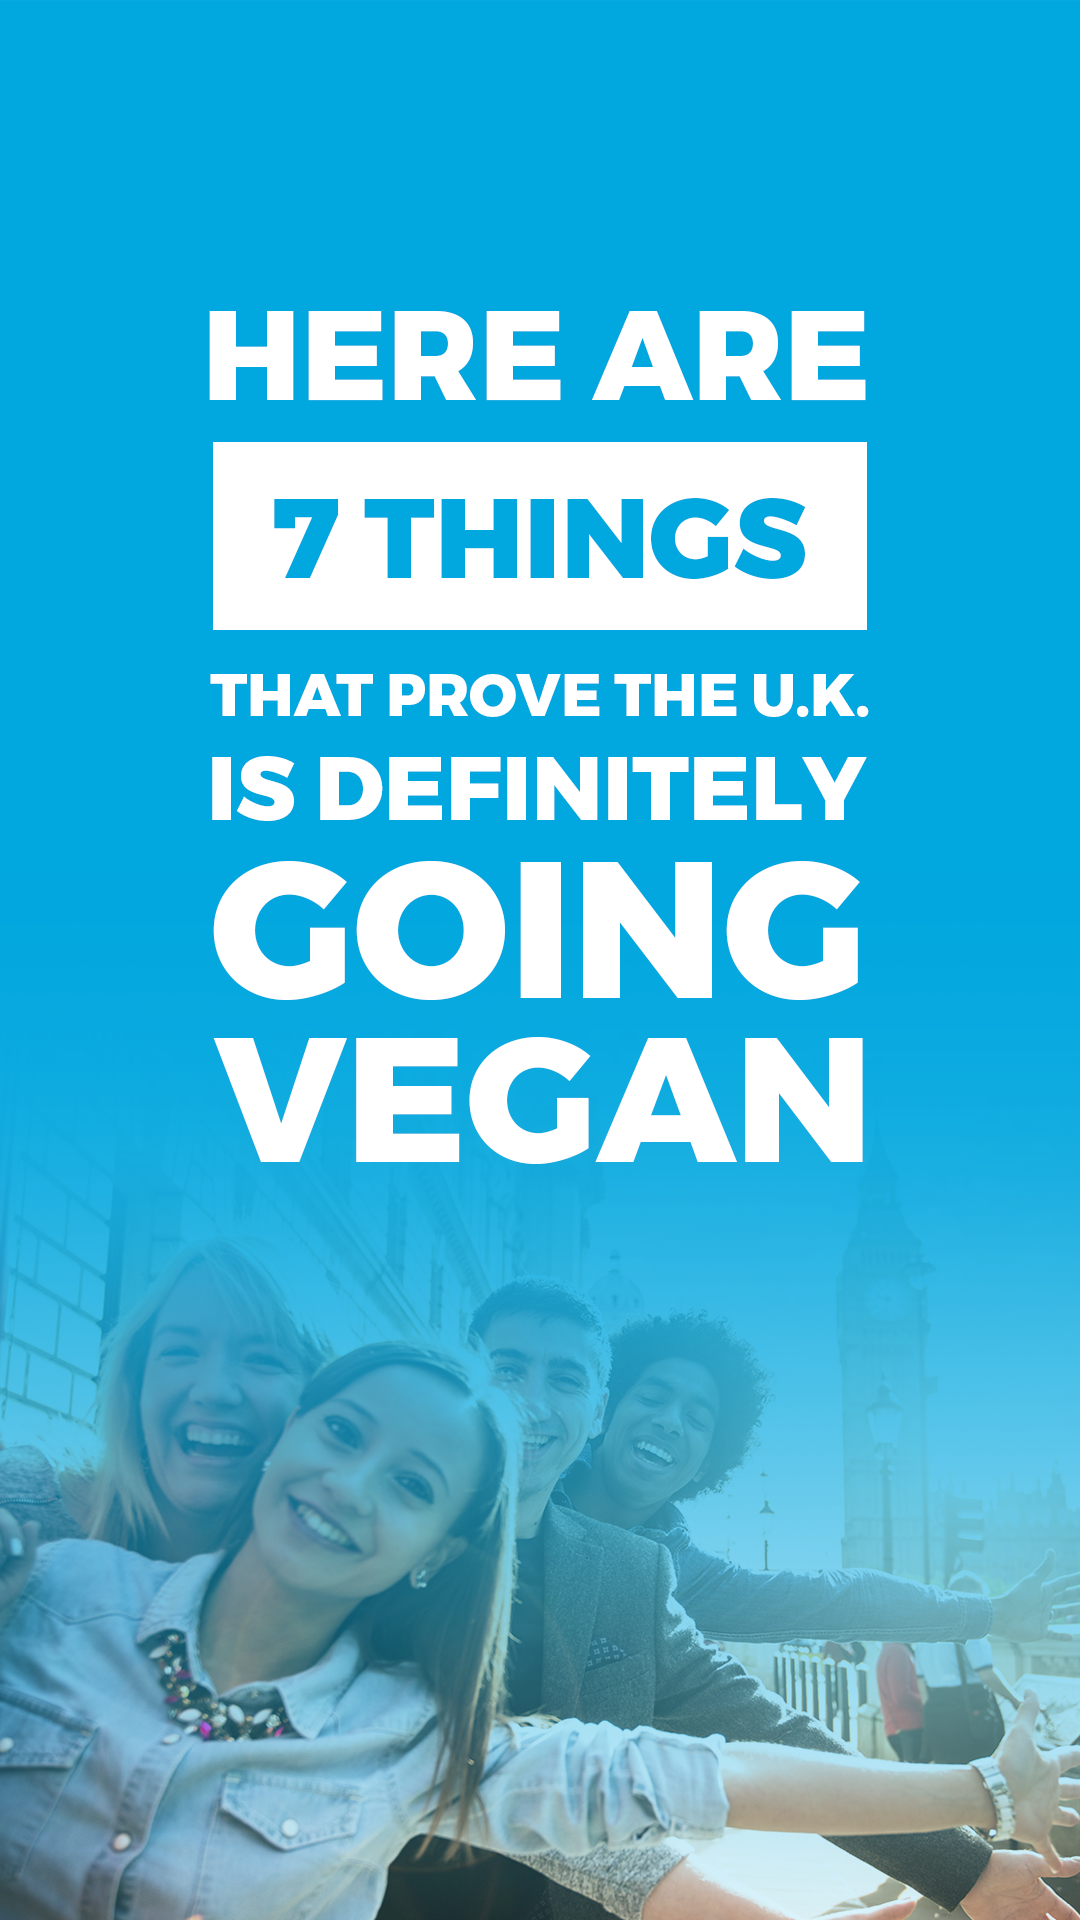 Here Are 7 Things That Prove the U.K. Is Definitely Going Vegan